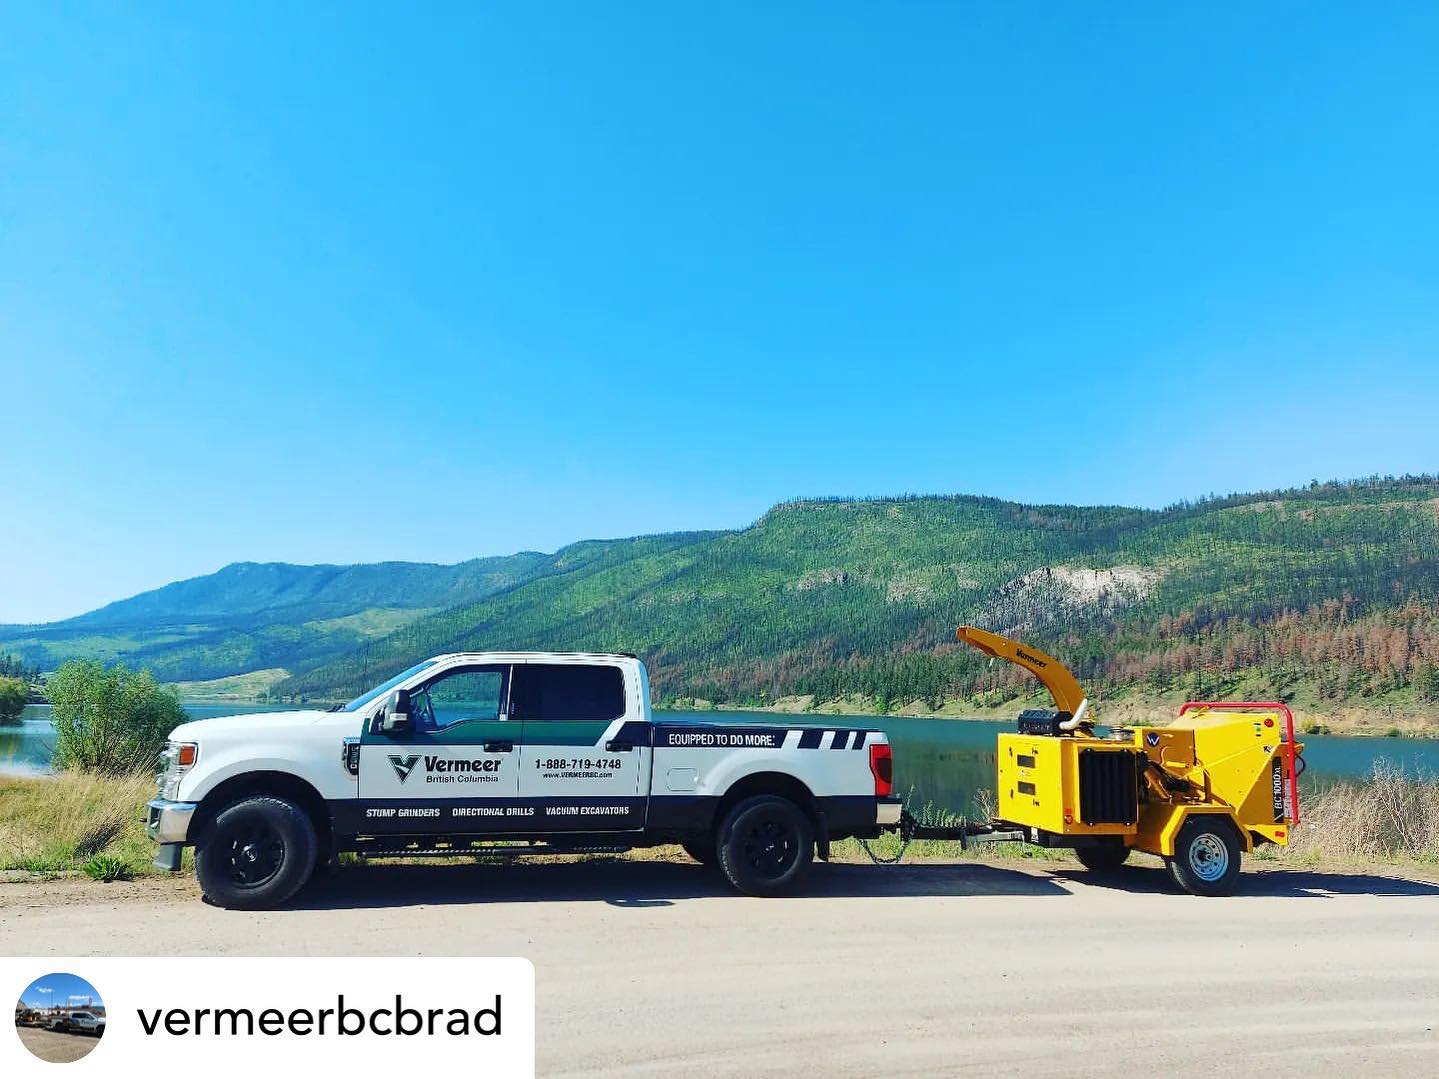 #repost @vermeerbcbrad New BC1000XL Diesel is being delivered in Vernon today! This picture is important. In the background is the scorched hillsides in Monte Lake after the recent wildfire. Vermeer brush chippers are being utilized to mitigate fire risk  in both residential and rural bc communities. #vermeerbc  #BC1000XL#westerraequipment #vermeertreecare